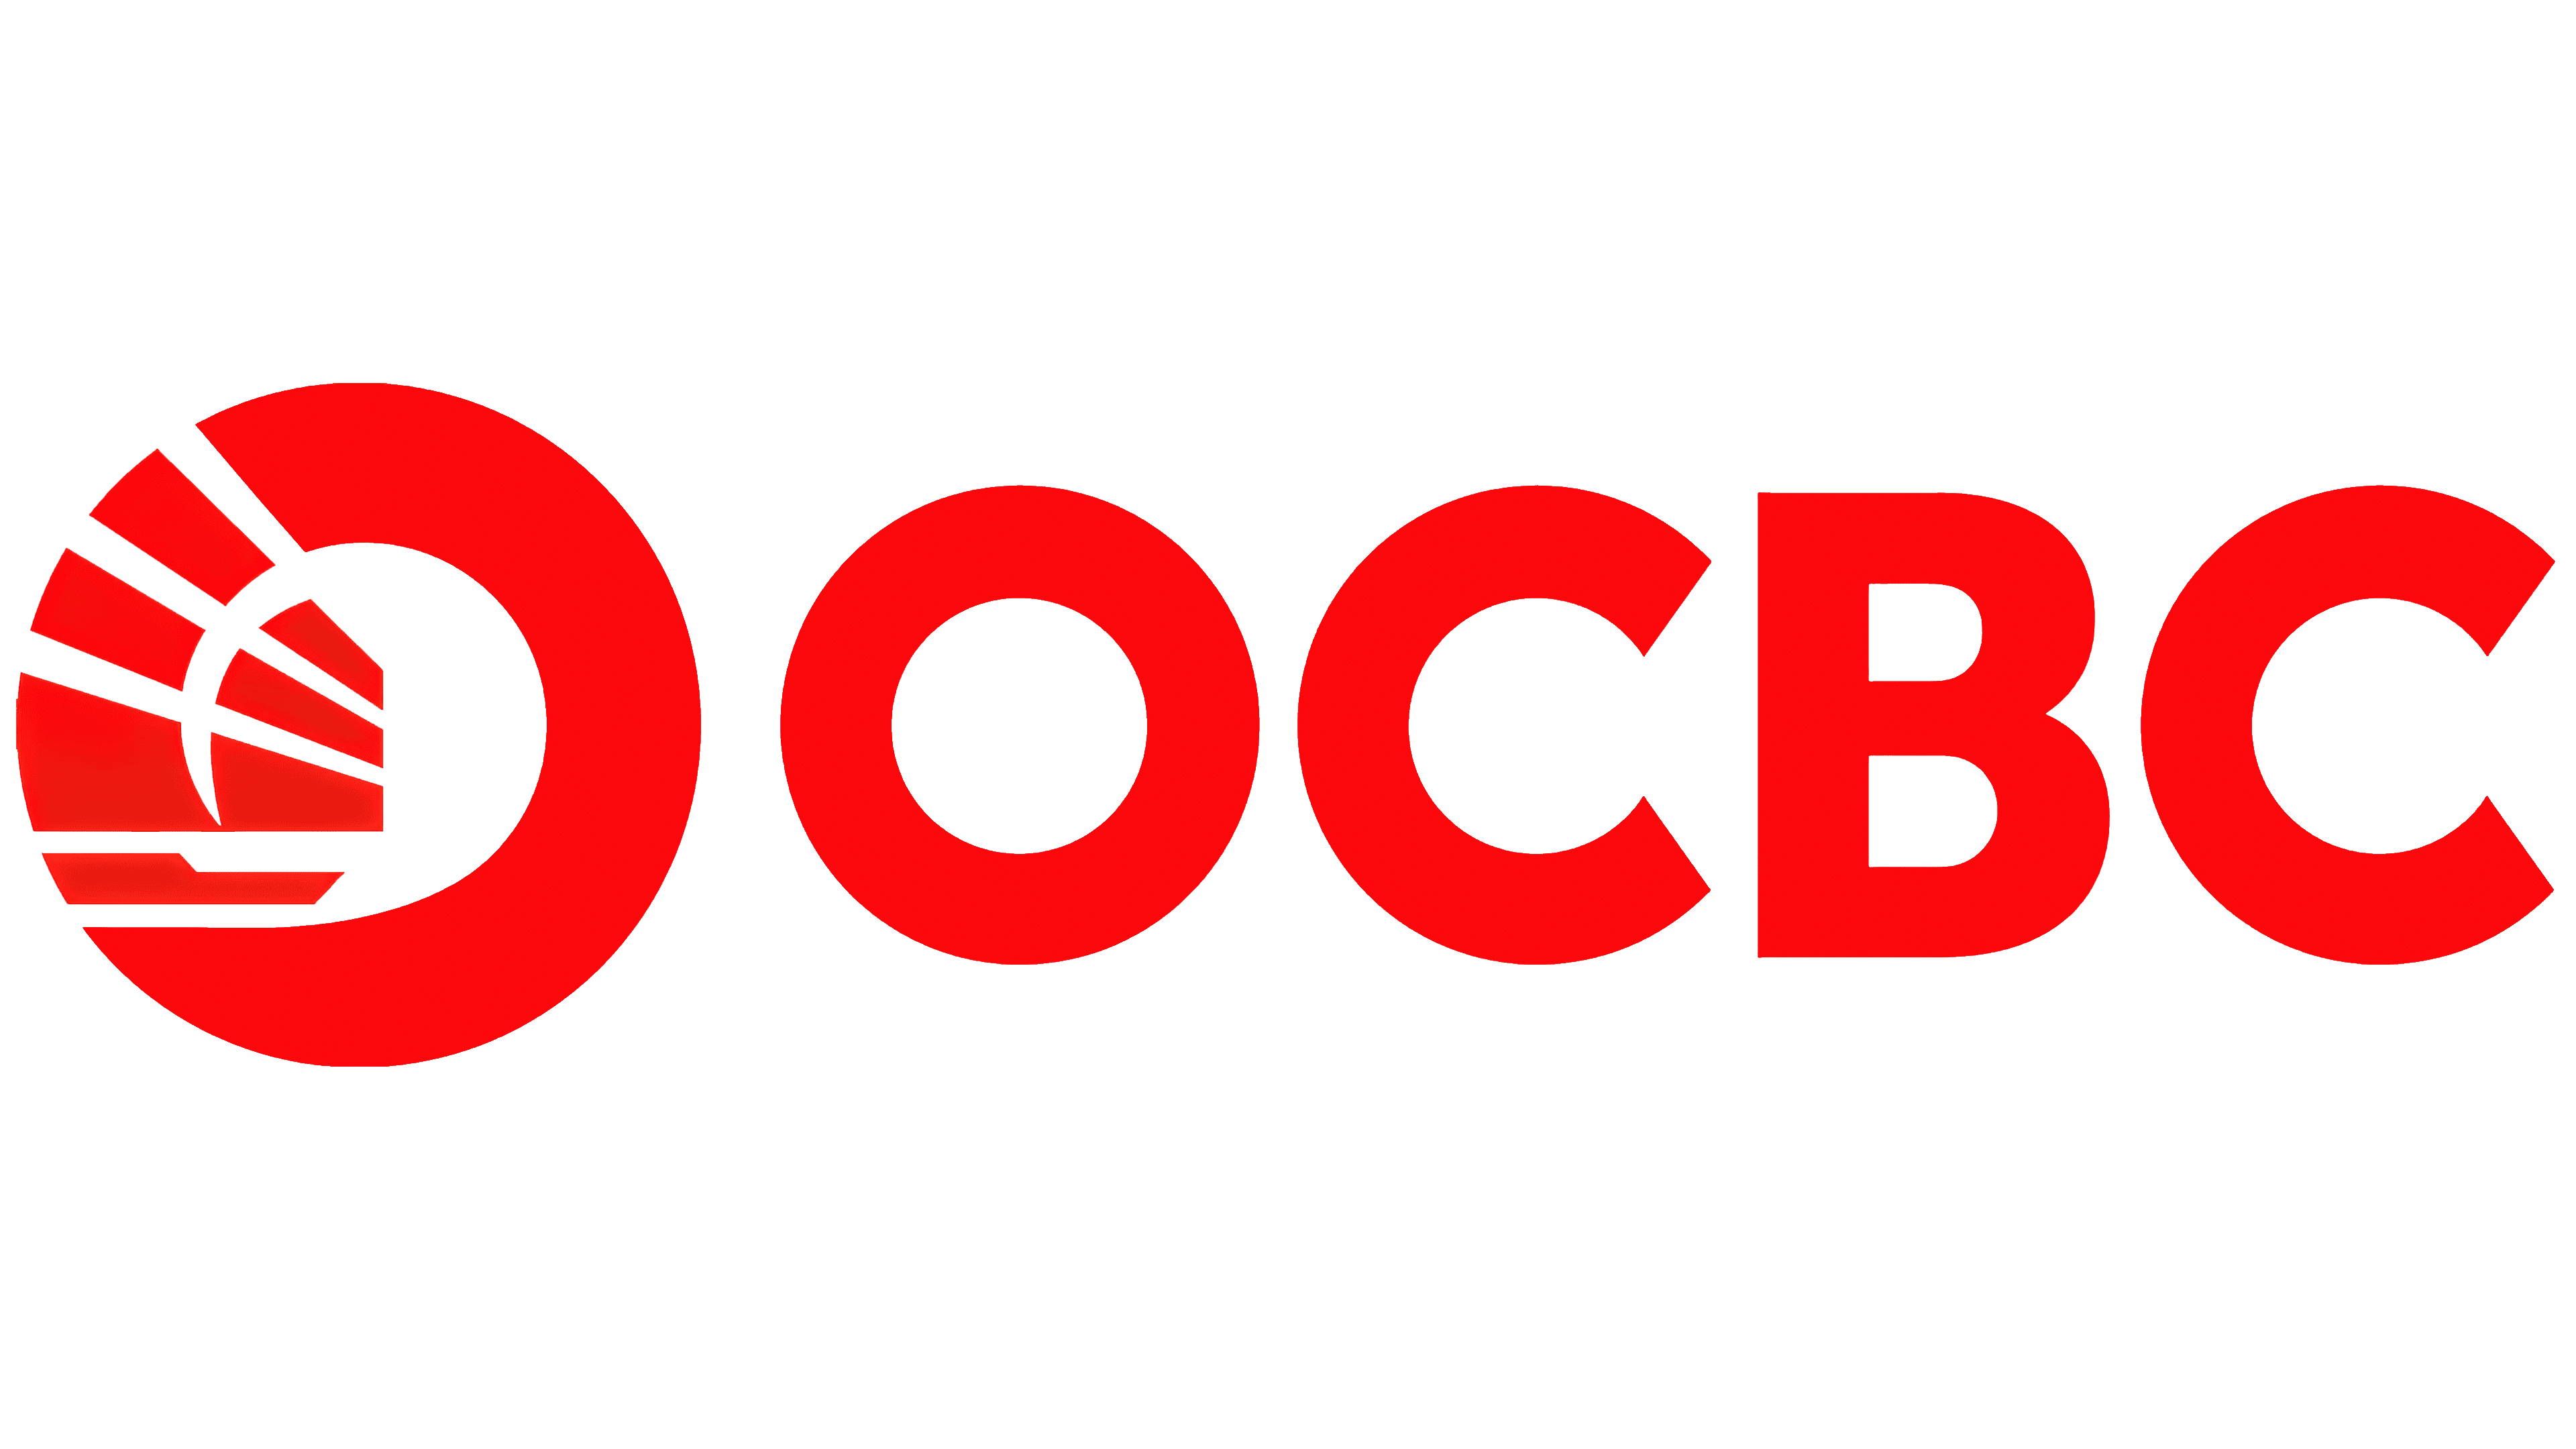 OCBC Rolls Out Unified Branding Strategy Across Key Markets to Spur